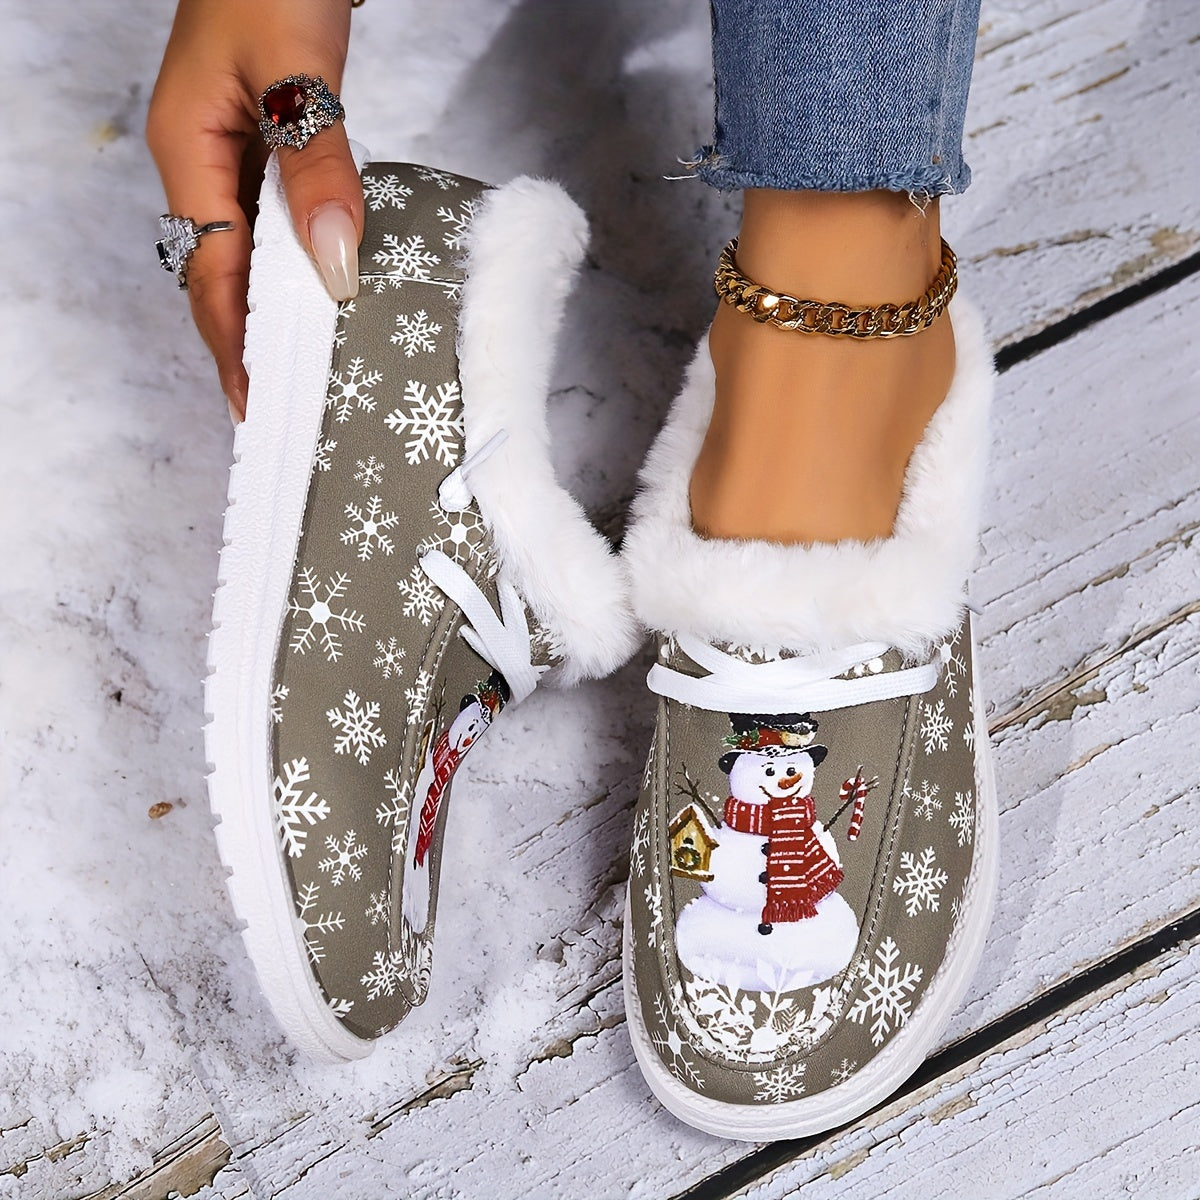 Women's Christmas Style Canvas Shoes, Snowman & Snowflake Pattern Flats, Casual Low Top Loafers